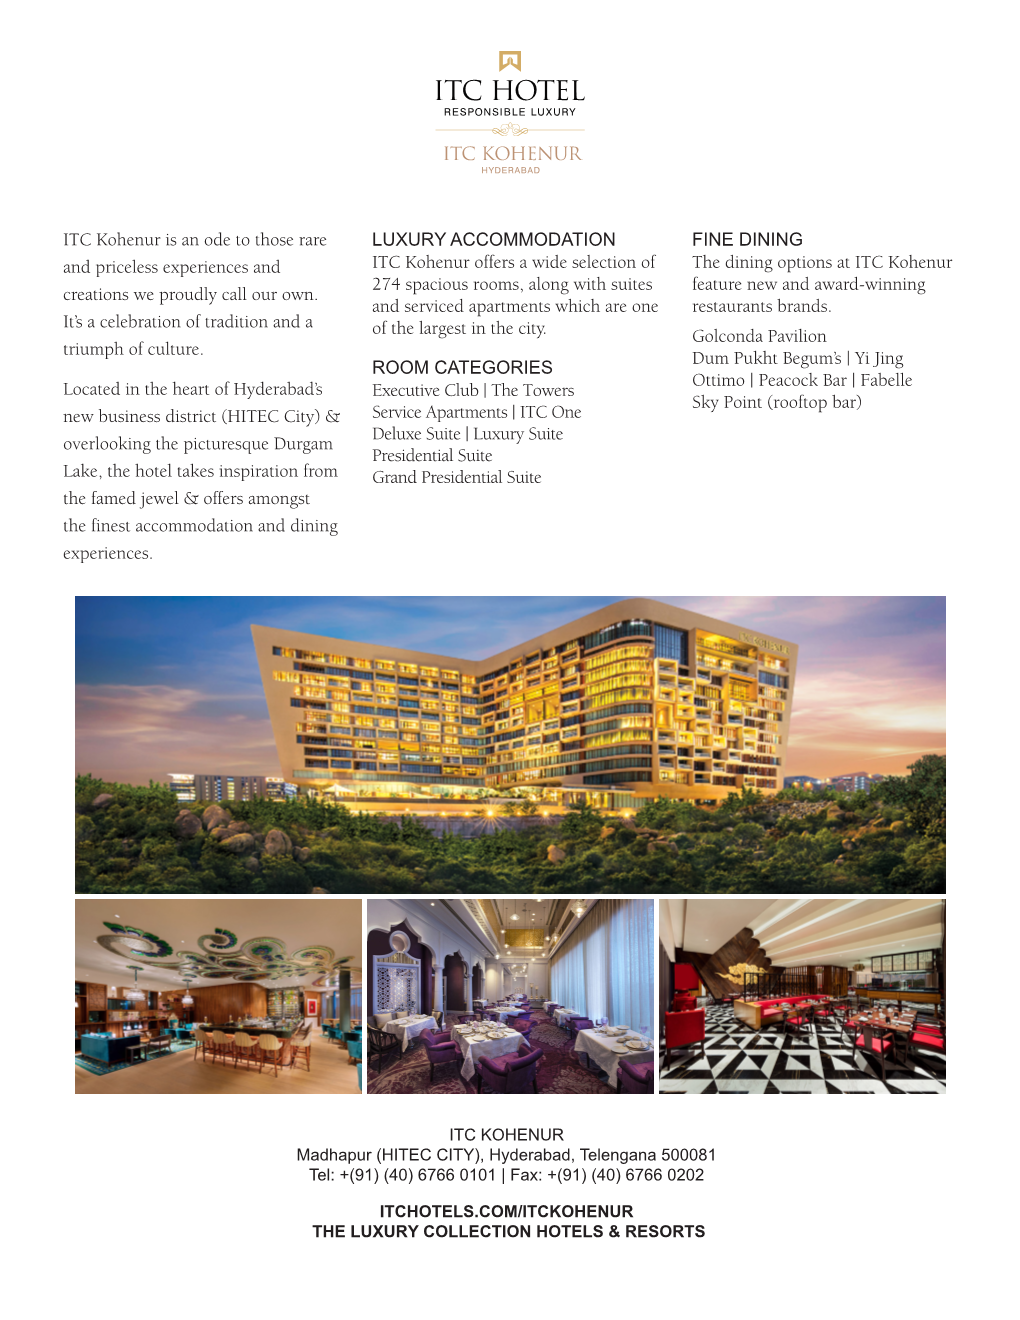 ITC Kohenur Is an Ode to Those Rare and Priceless Experiences And